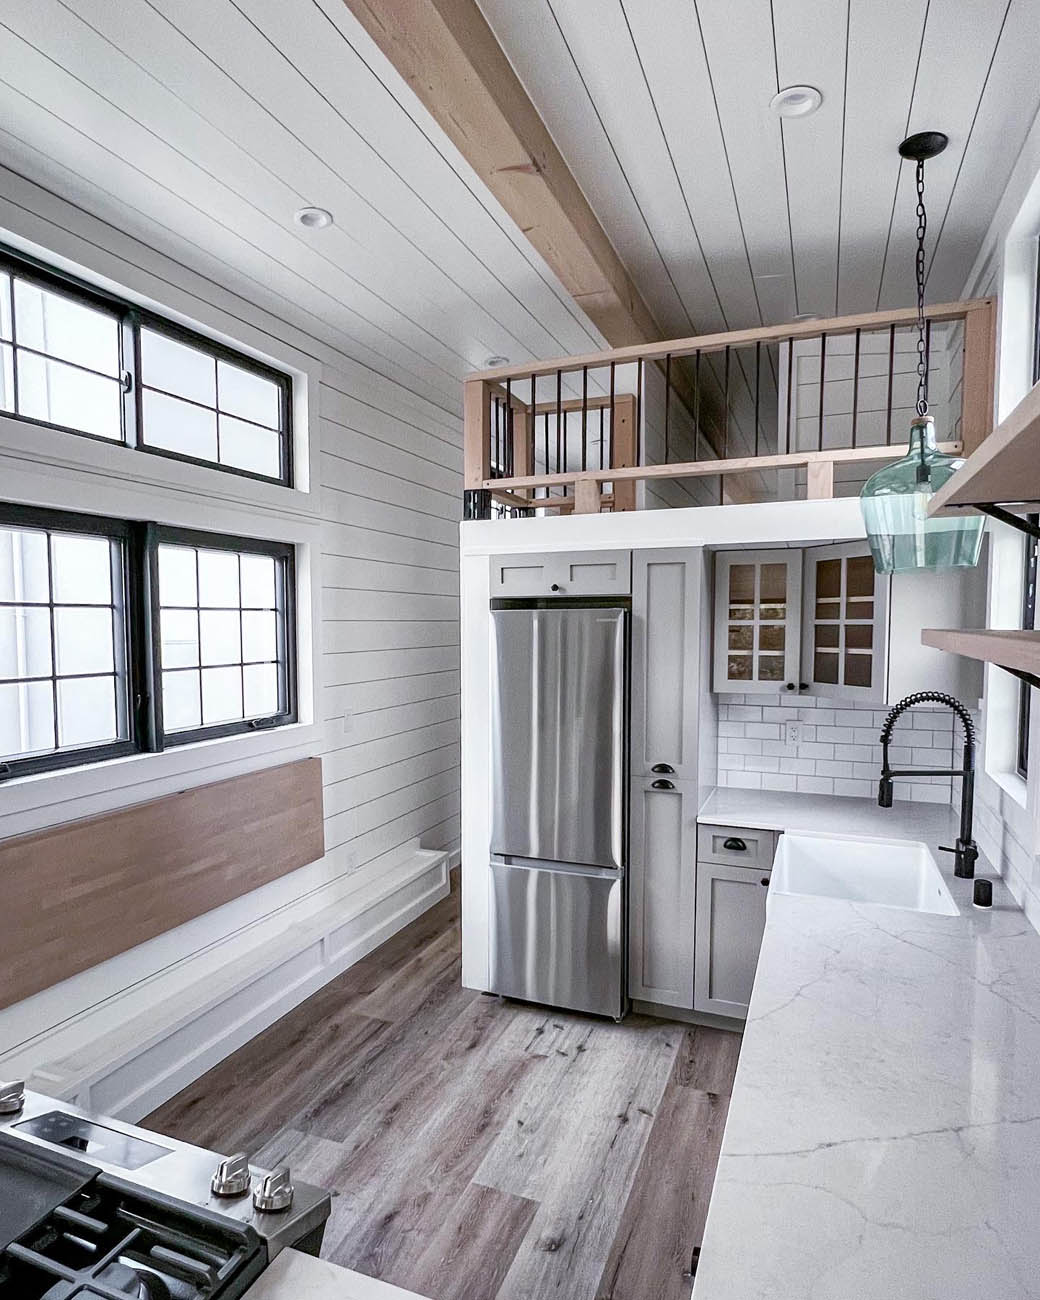 Inside a tiny ADU kitchen with a bedding loft, provided by Anchored Tiny Homes custom small home builder in The Woodlands / Conroe.